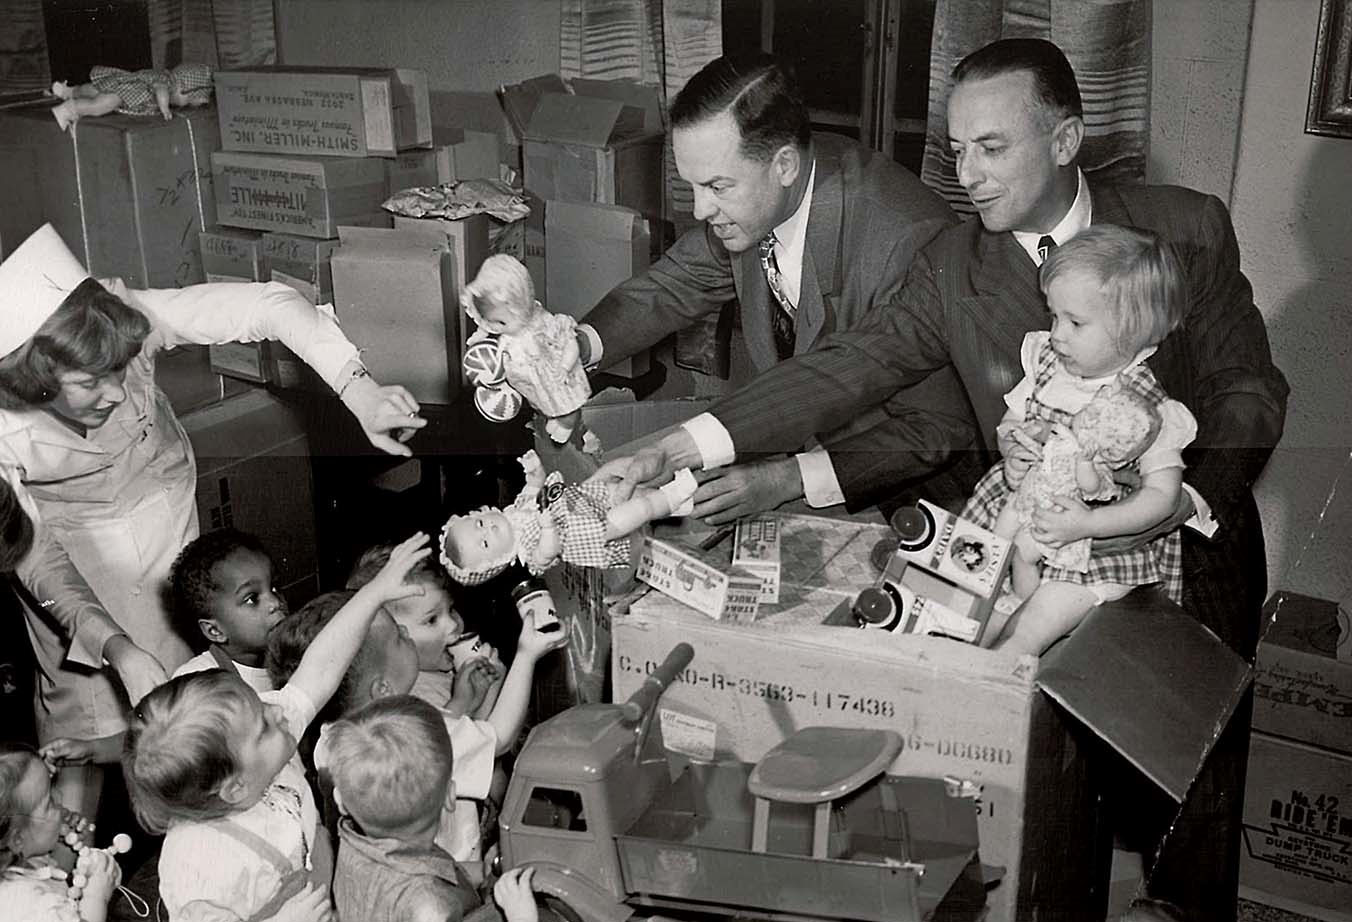 Children receive donated toys on December 23, 1948, at the St. Vincent’s Infant Asylum (Orphanage), which later merged with the DePaul Day Nursery and Settlement House to become the St. Vincent de Paul Center.  